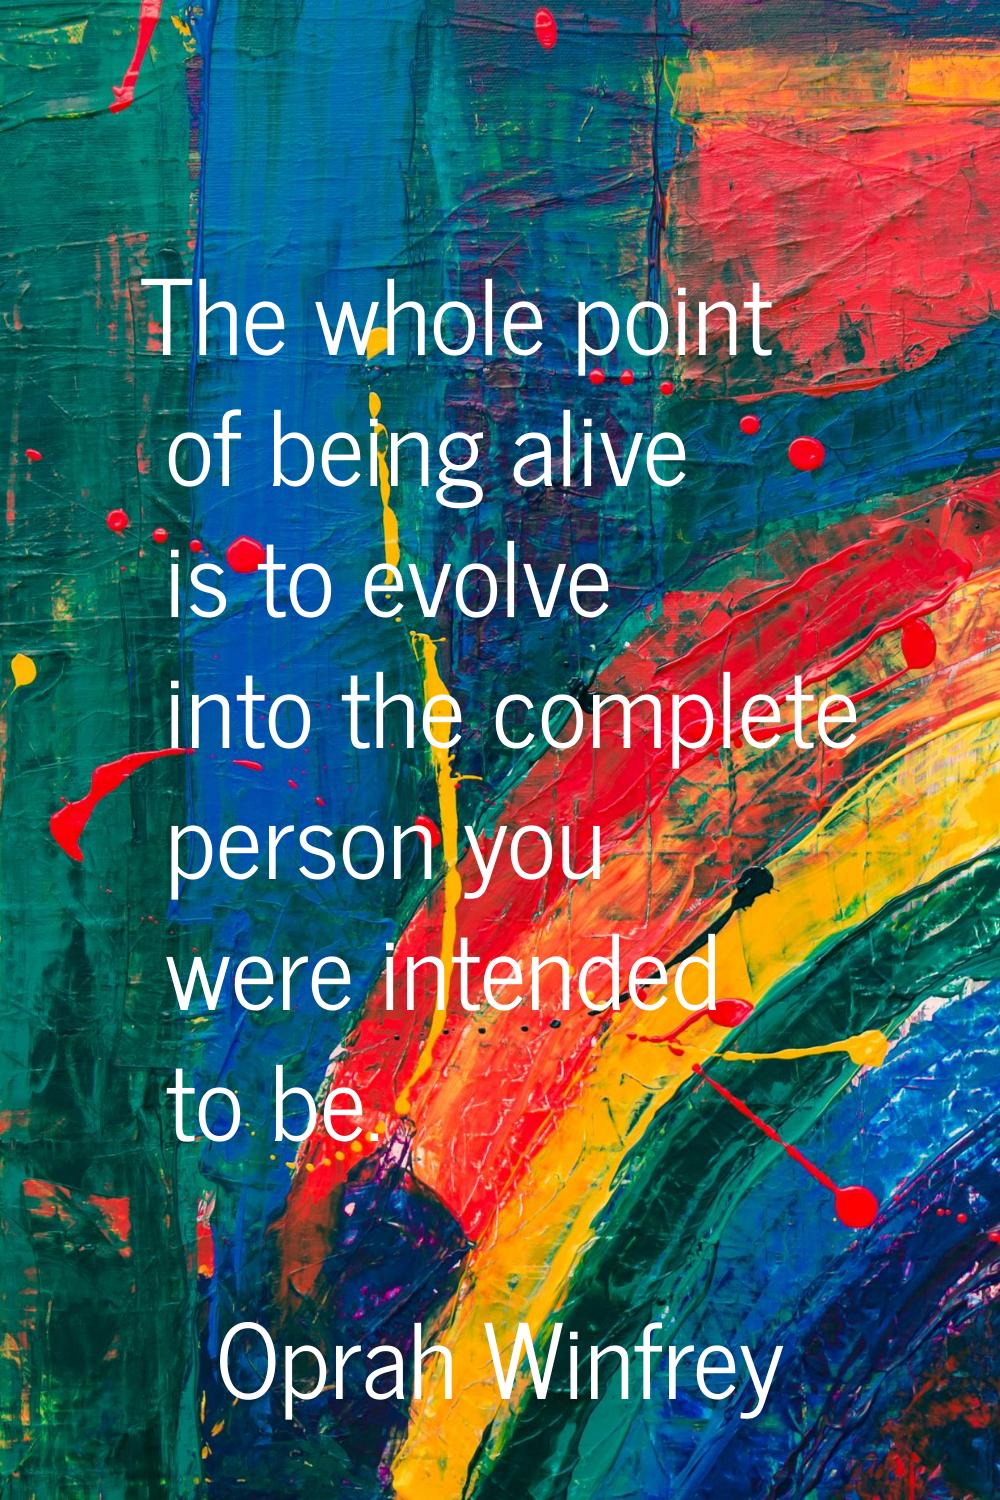 The whole point of being alive is to evolve into the complete person you were intended to be.